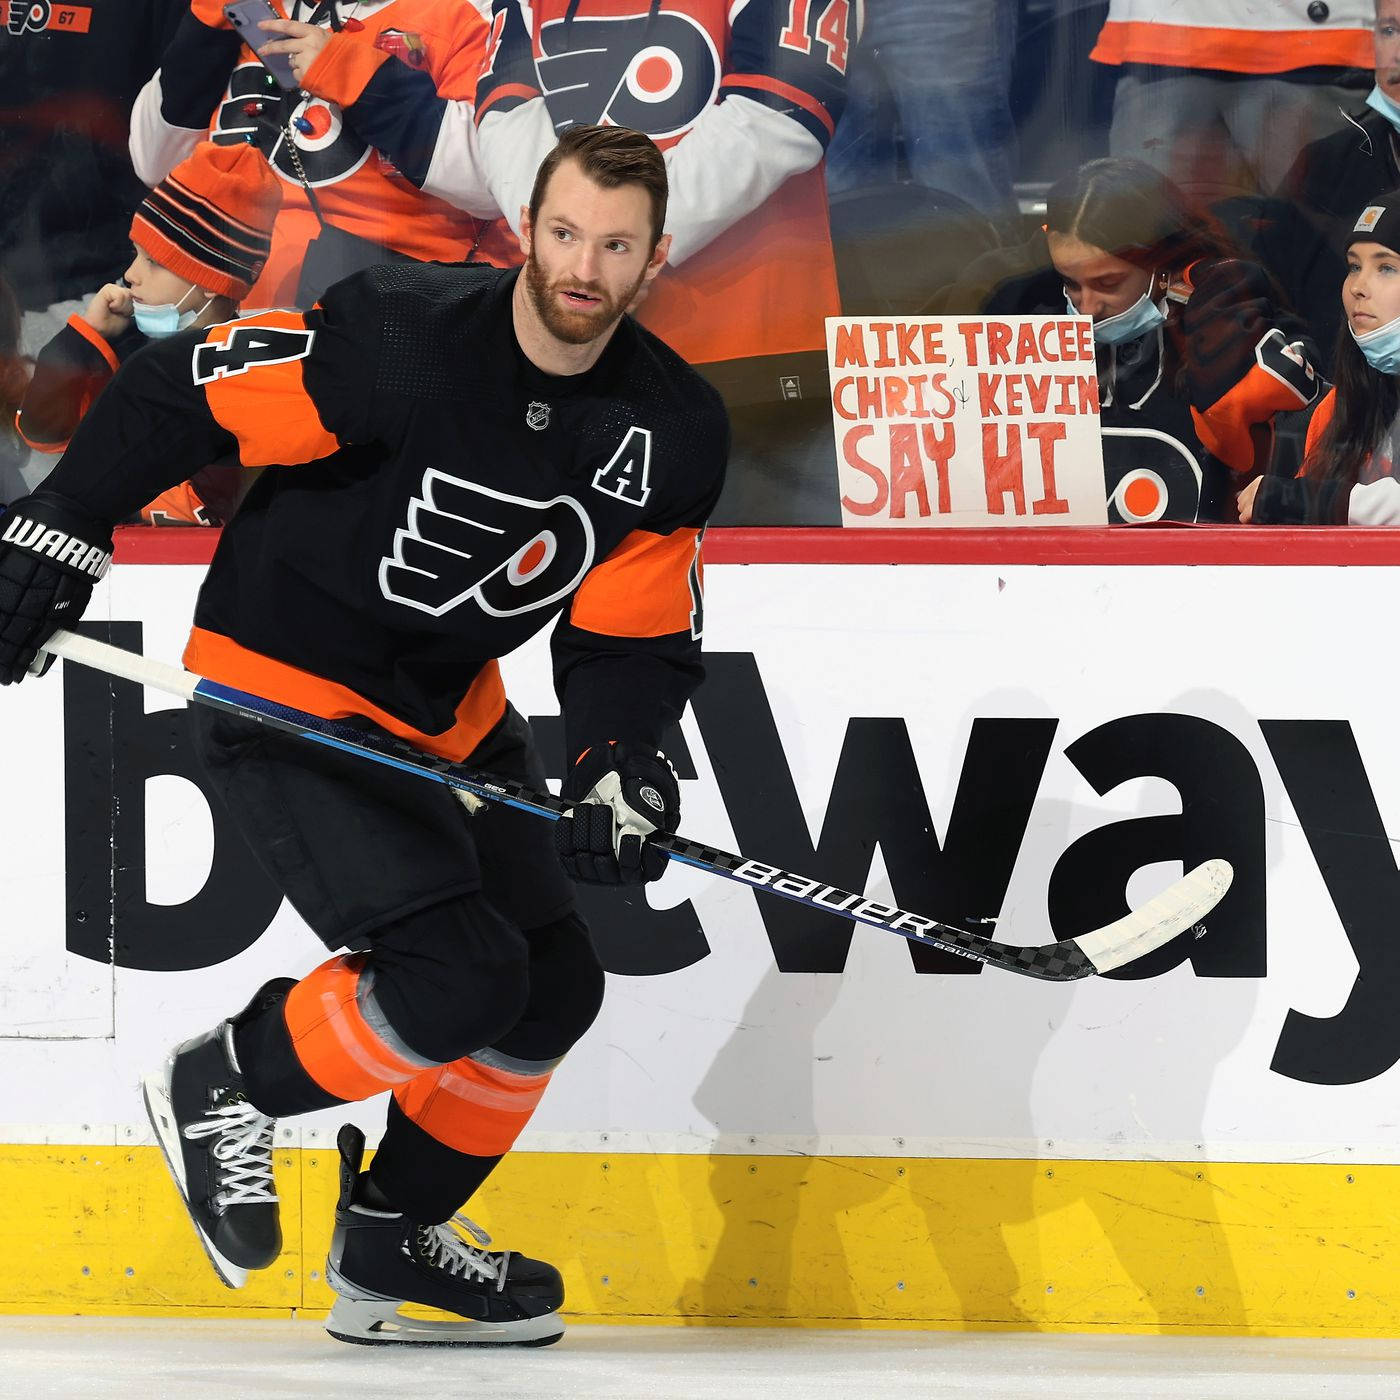 Sean Couturier Ice Hockey Player Wallpaper